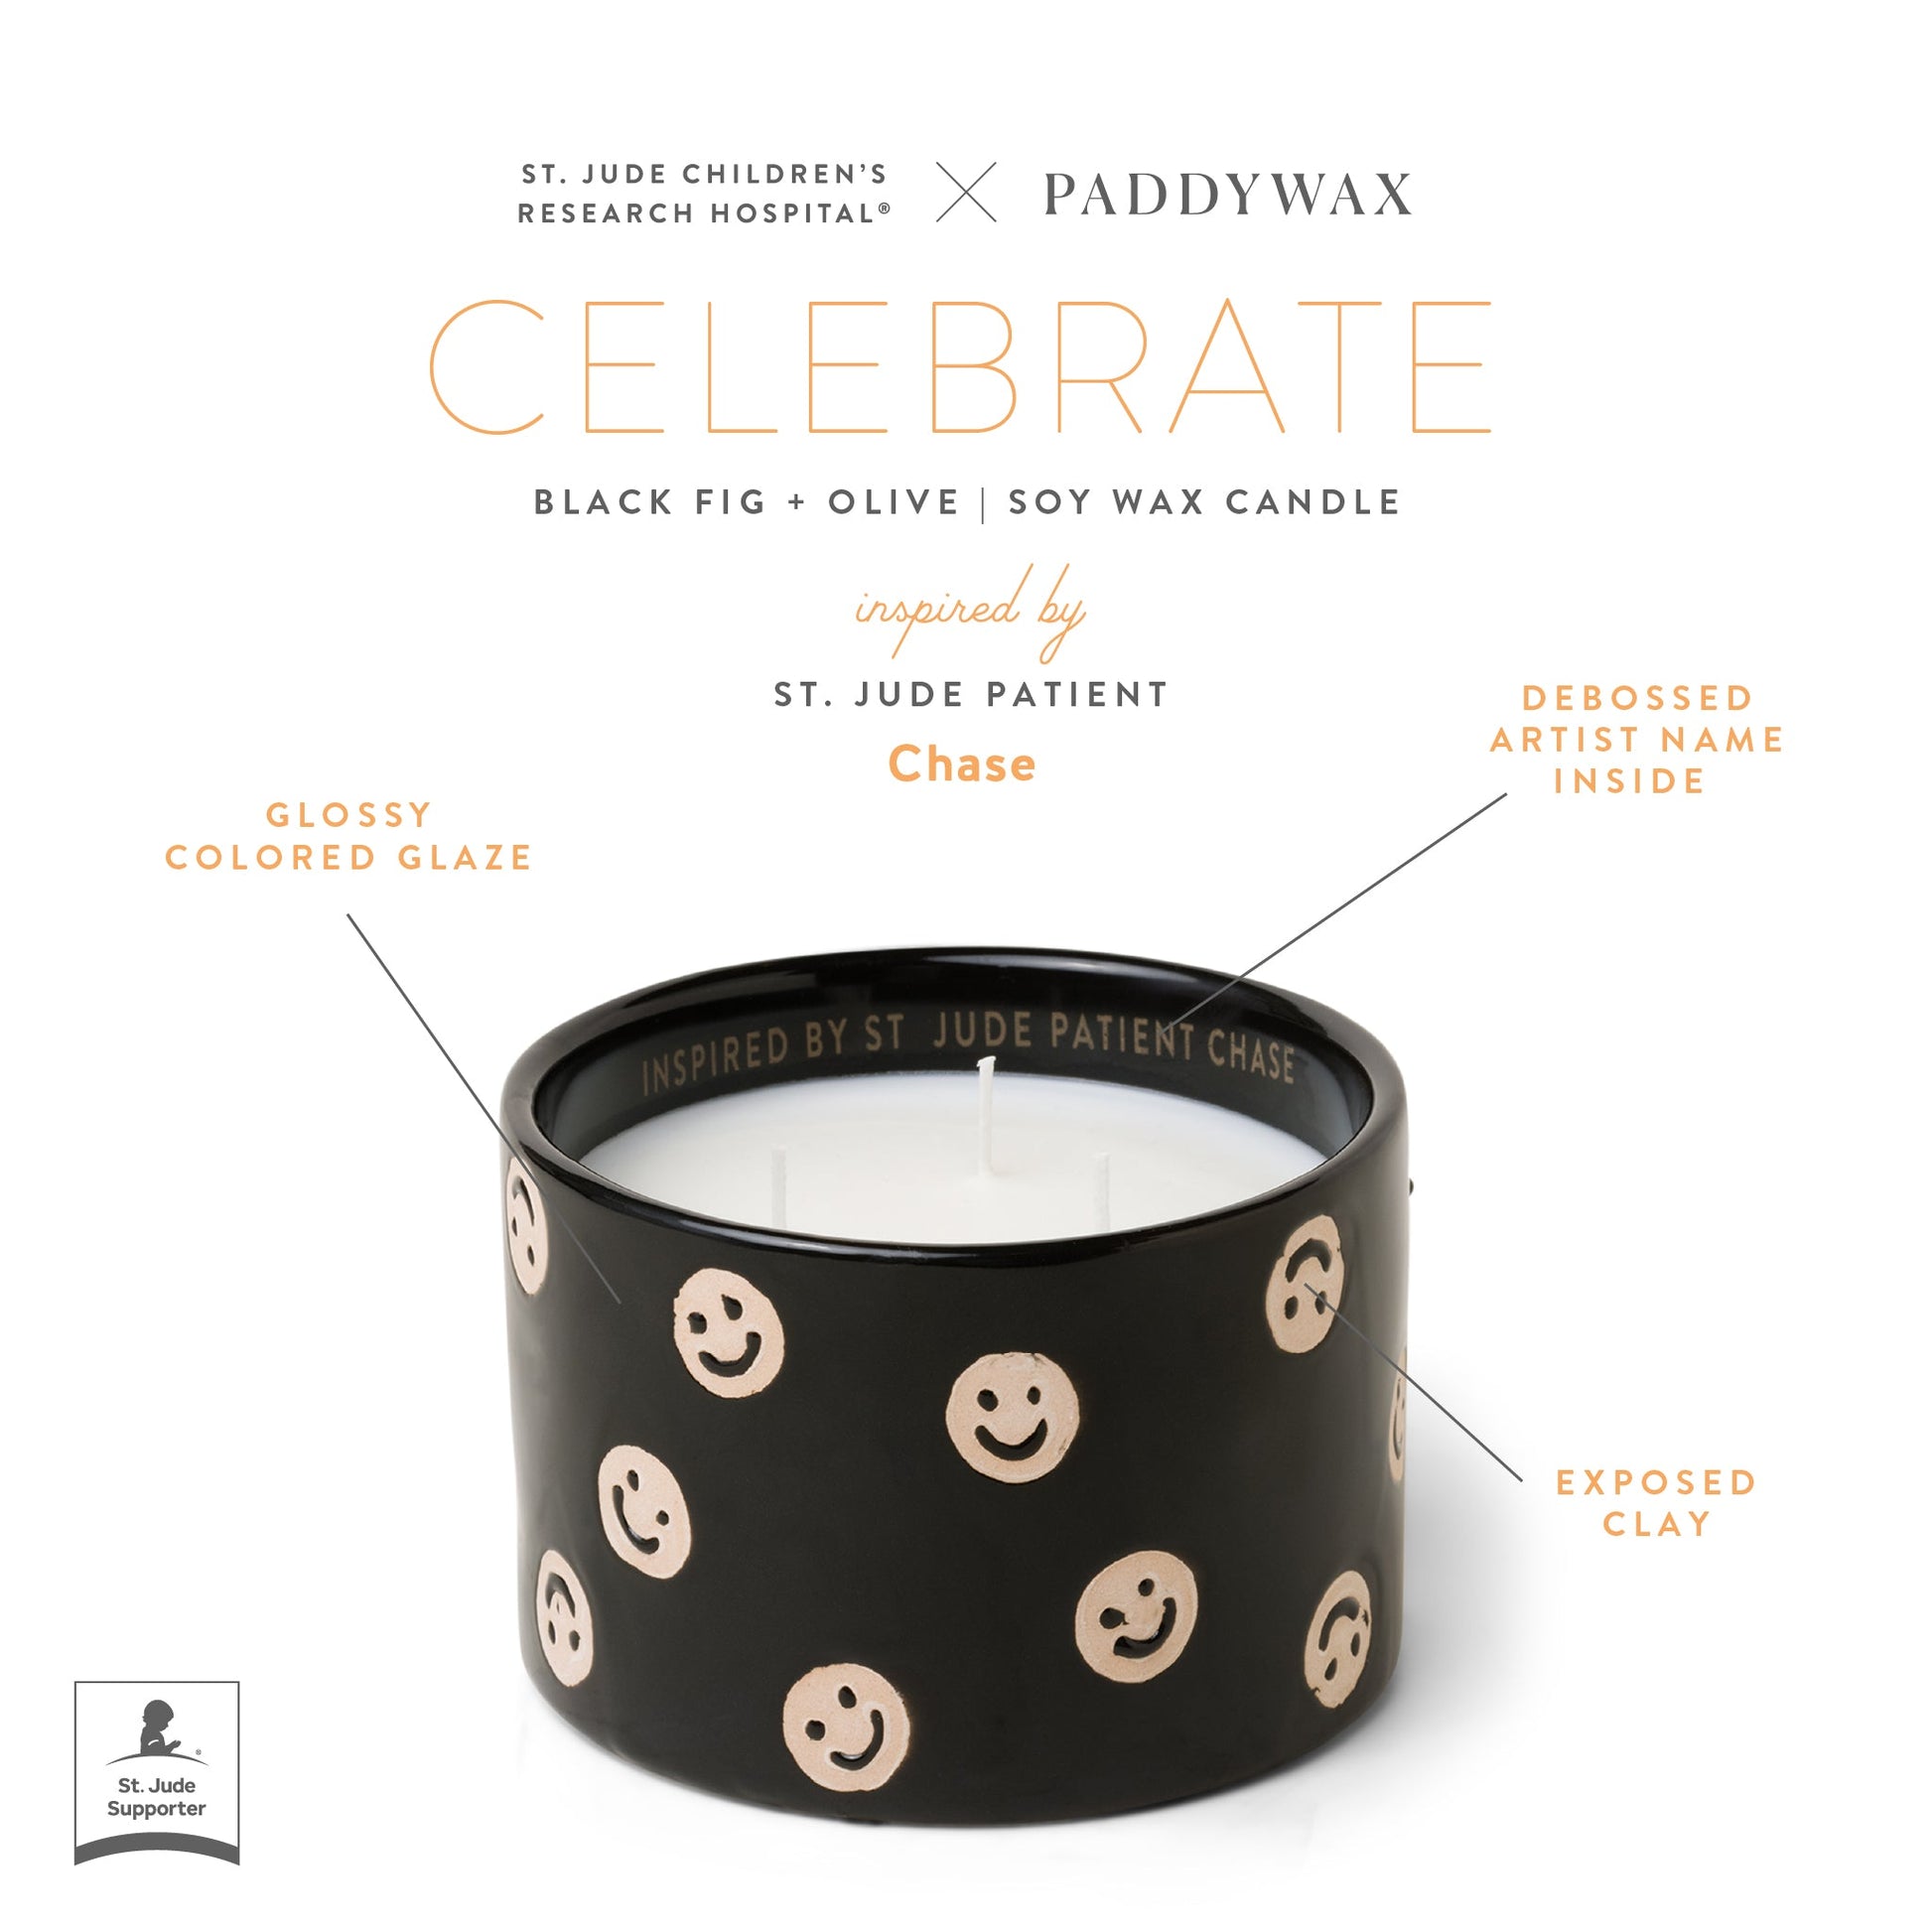 Infographic of black ceramic candle with product features text "St. Jude Children's Research Hospital ® x Paddywax Celebrate Black Fig + Olive Soy Wax Candle inspired by St. Jude Patient Chase. Glossy colored glazed. Debossed artist name inside. Exposed clay."